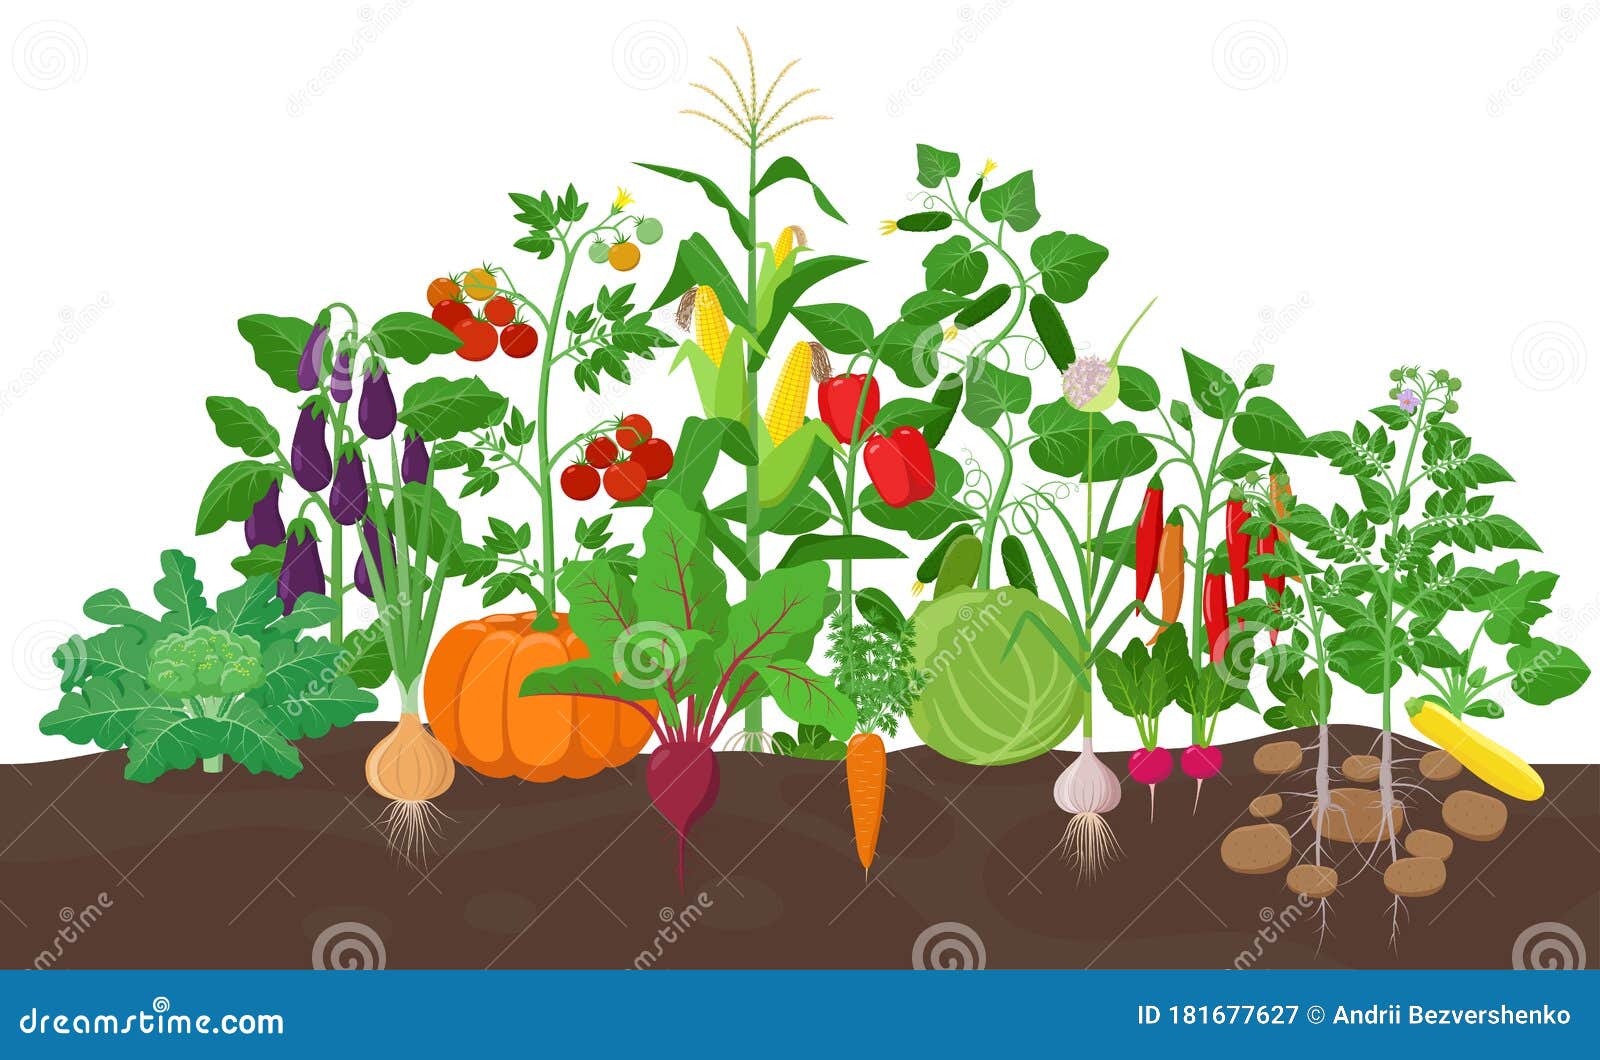 garden with vegetable plants growing in the garden -  flat , group of vegetable plants in soil